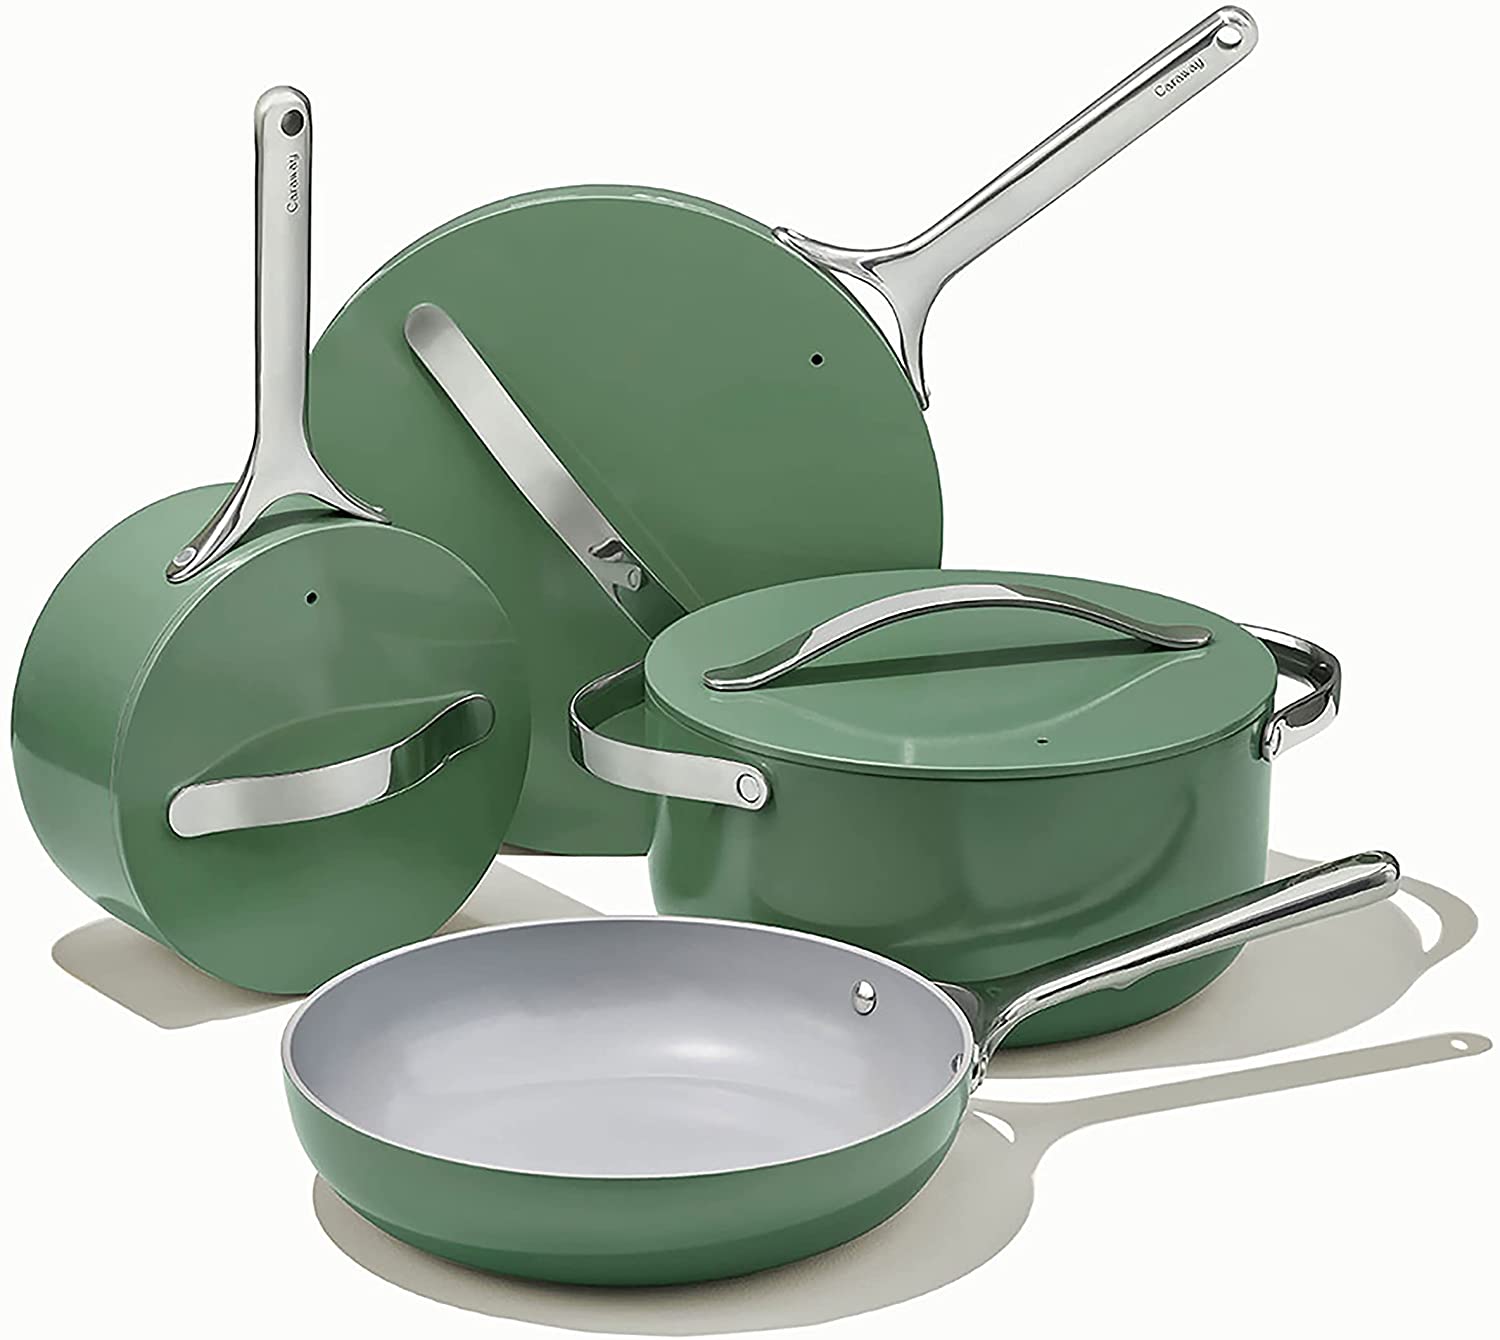 Best Non-Toxic, Non-Stick Bird Safe Cookware - Natalie in the City